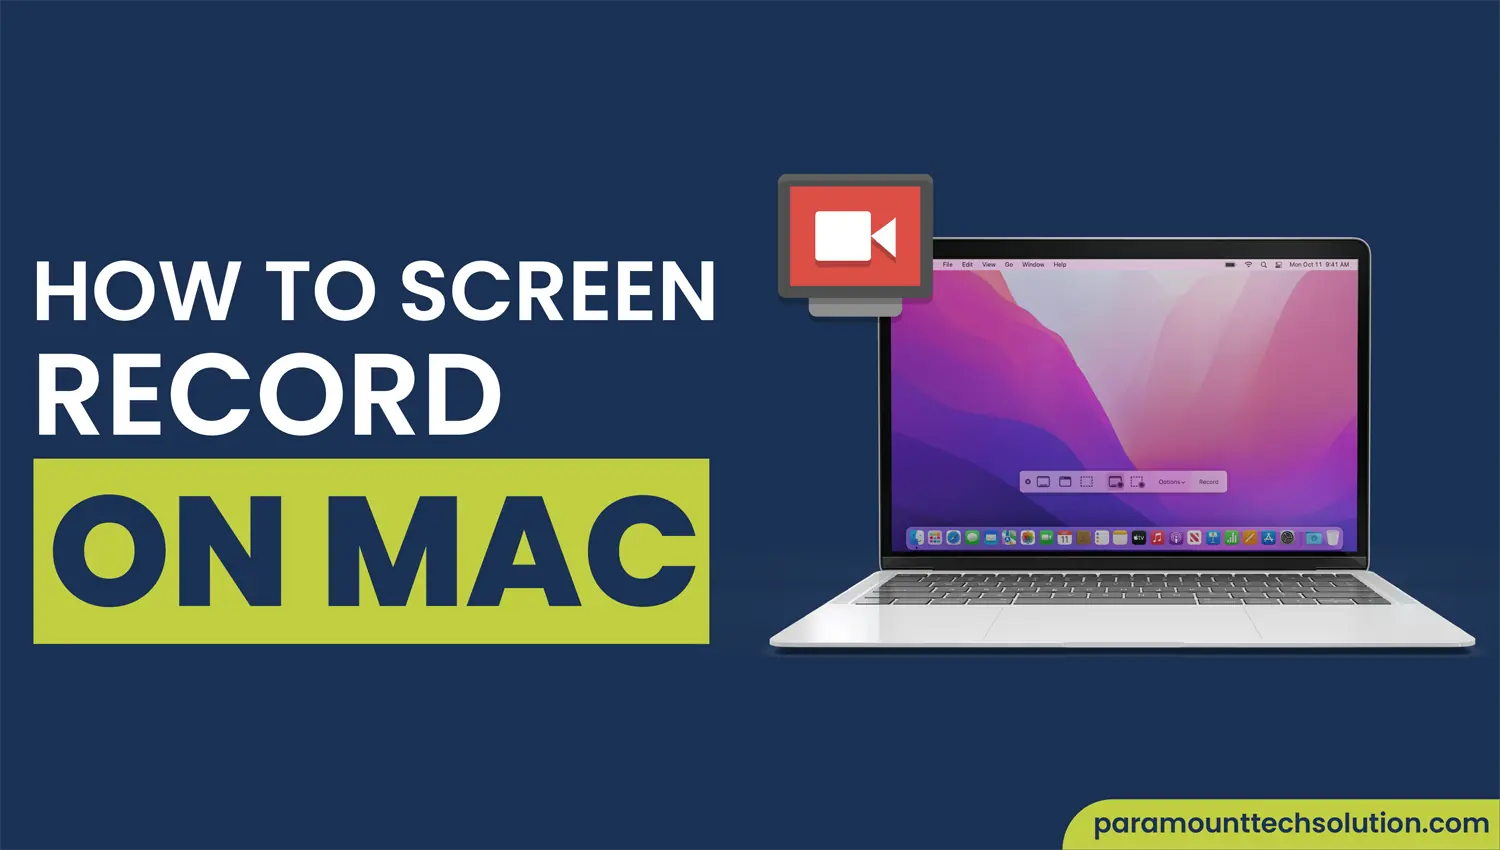 Learn step by step How to Screen Record on Mac with different apps and shortcut keys